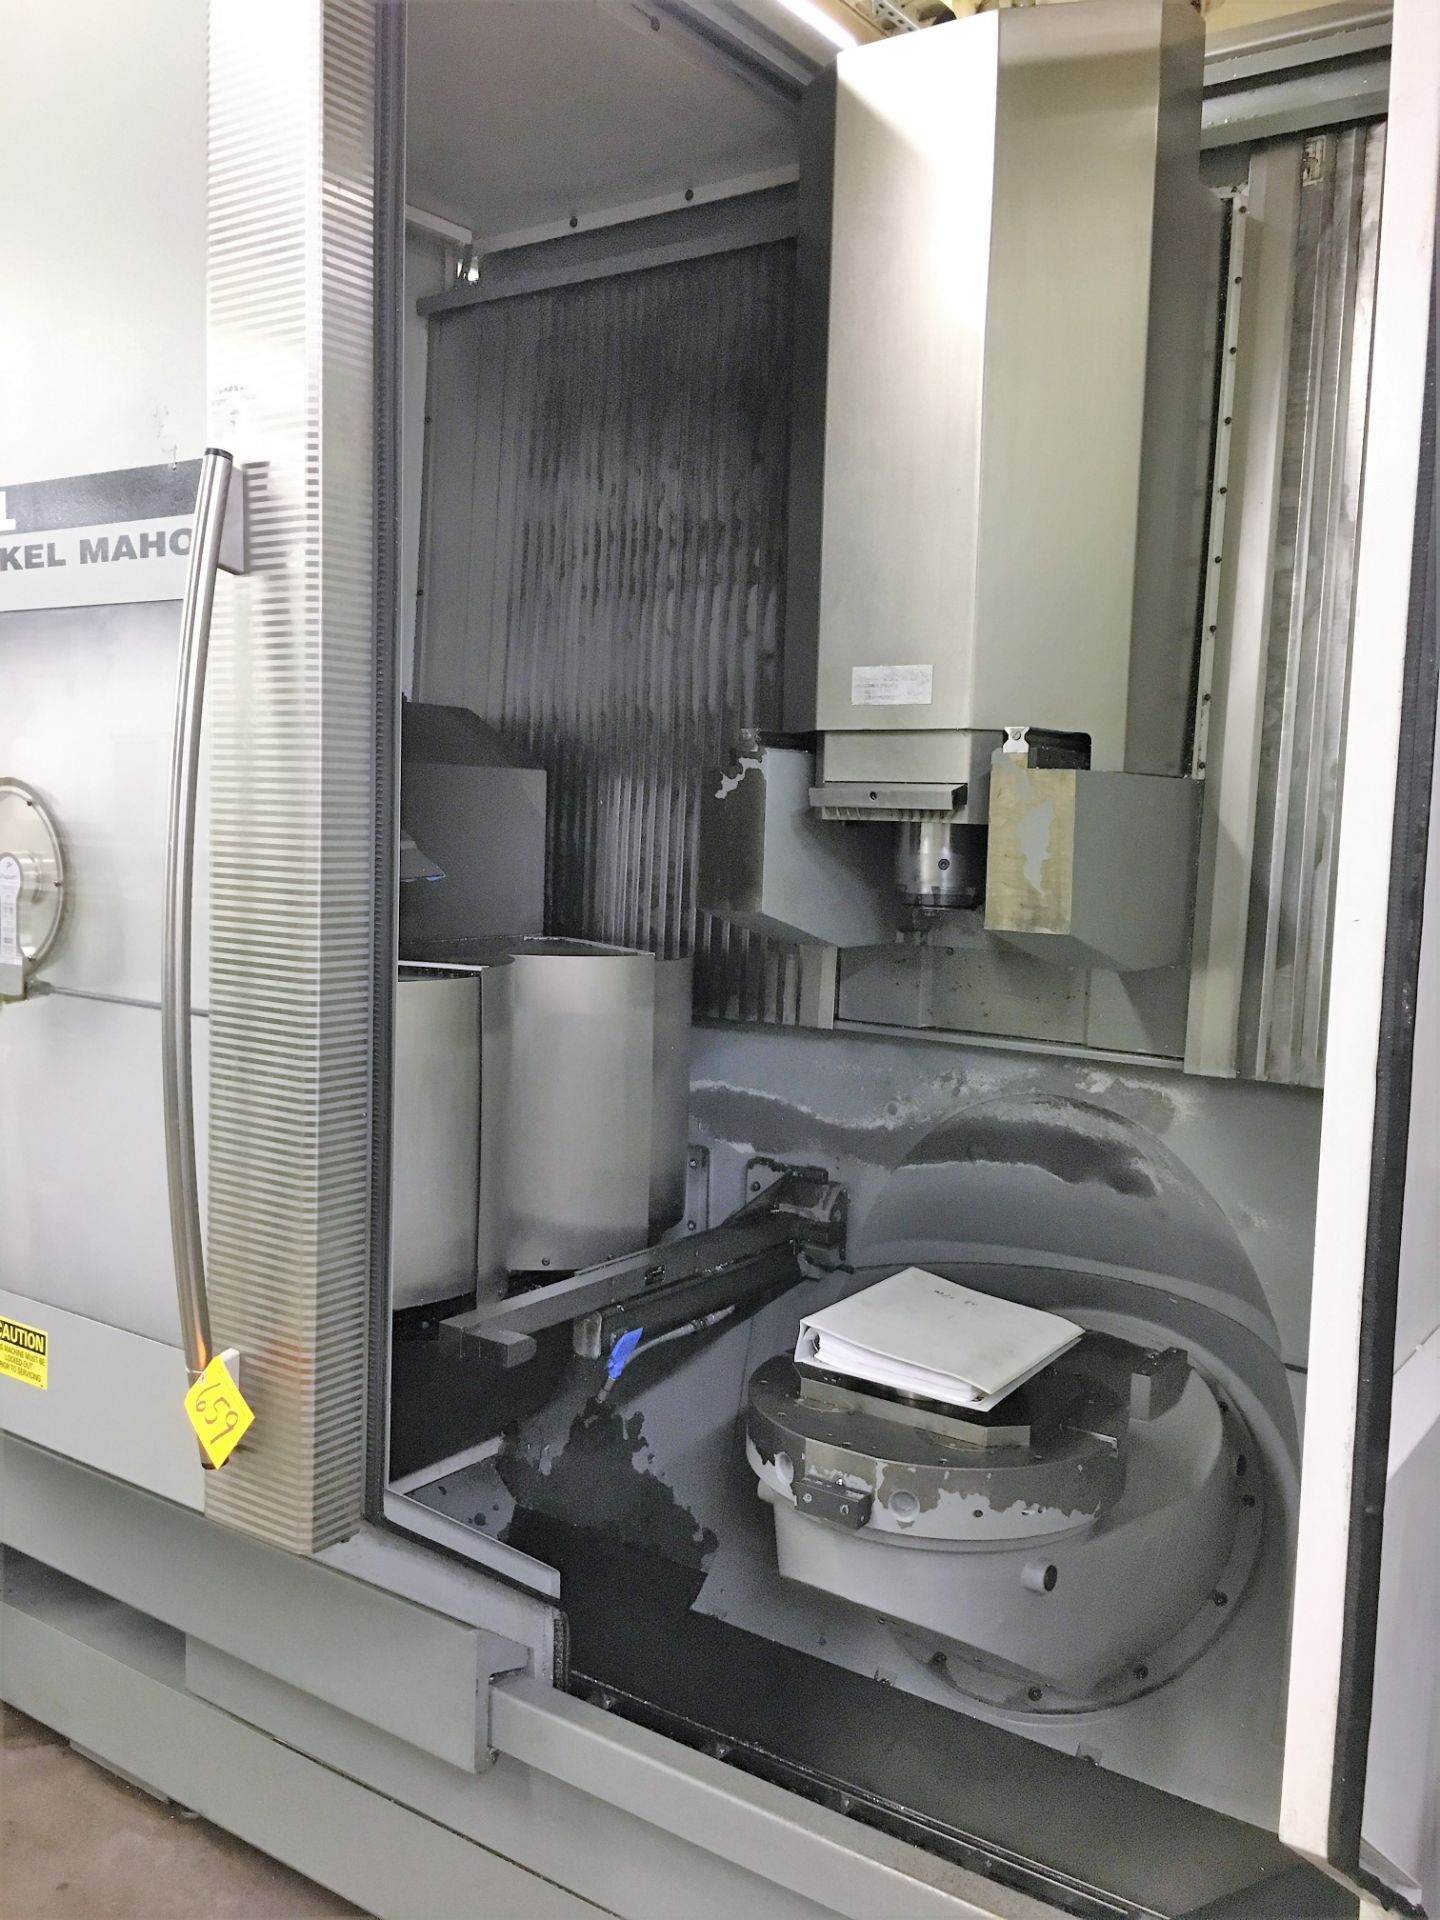 DECKEL-MAHO # DMU-70-VL ''FULL-5-AXIS'' CNC ''TWIN-CNC ROTARY TABLE'' VERTICAL MACHINING CENTER WITH - Image 3 of 7